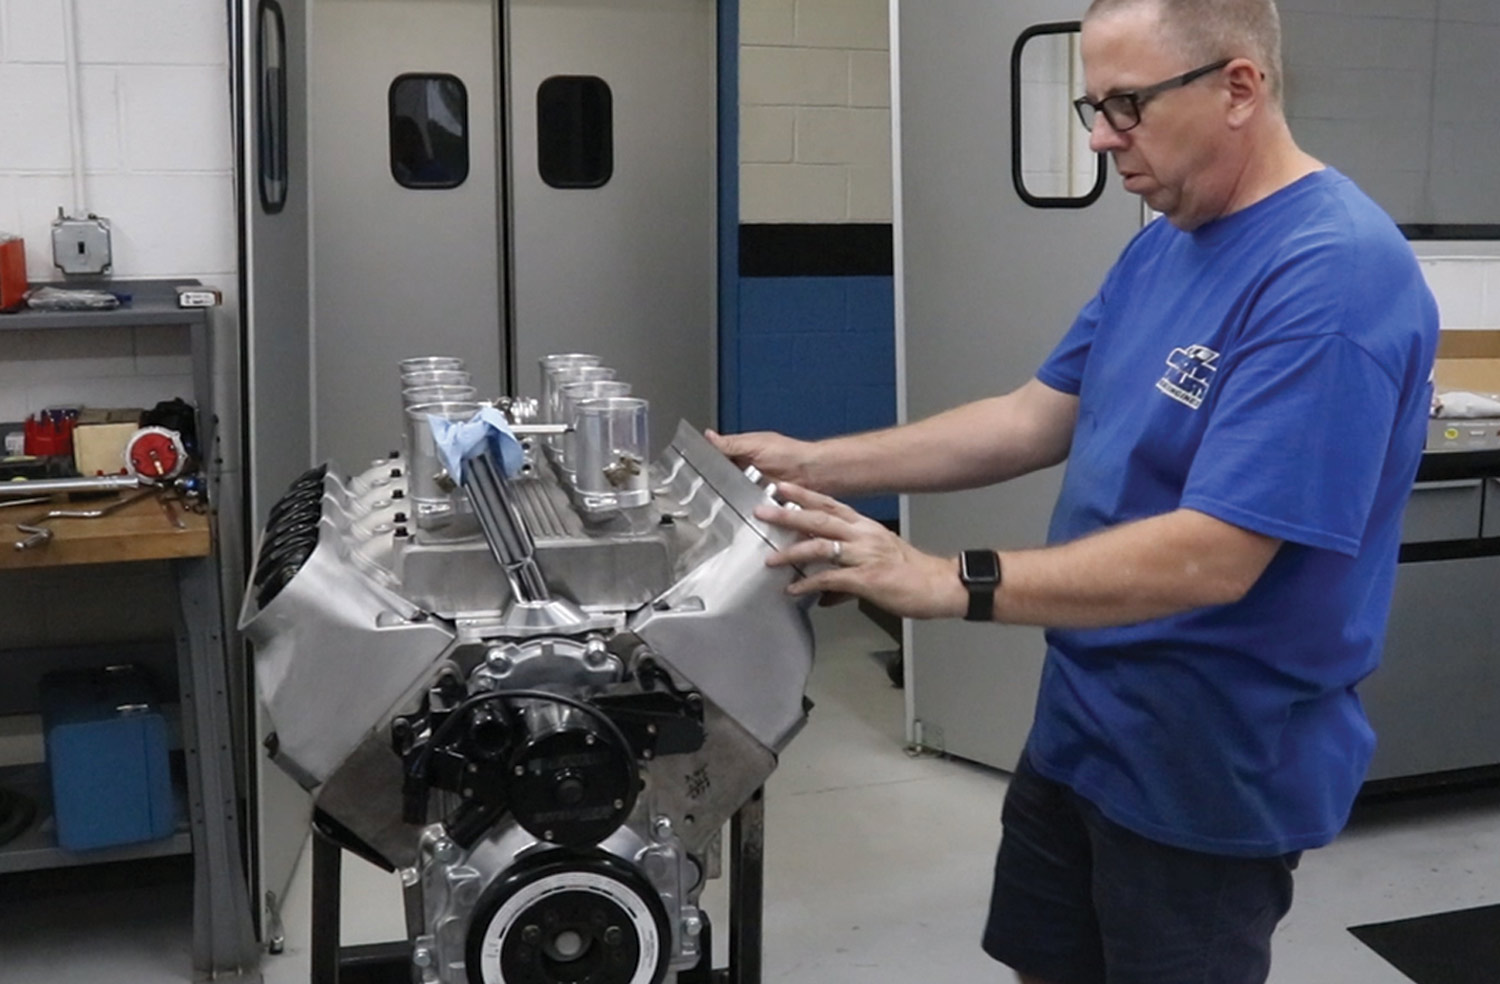 mechanic Jeff installs an electric water pump for the dyno pulls then begins assembling the rocker covers and ignition system